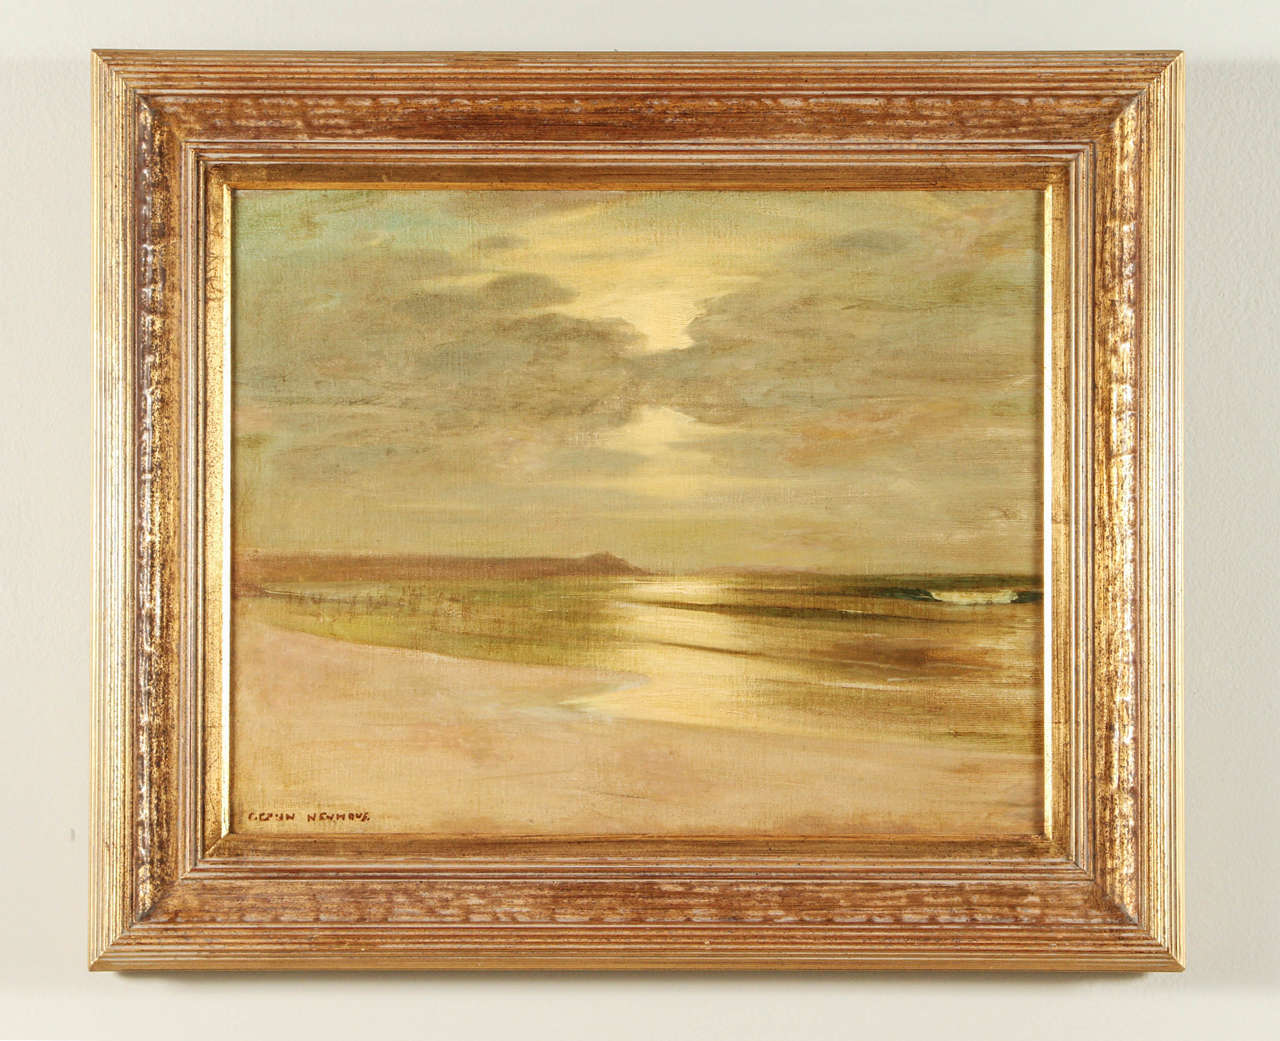 Early California Impressionist oil on canvas by Karl Eugen Neuhaus. German artist who settled in California in the early 1900s, known for his Tonalism - plein aire paintings of the California landscape. Oil on canvas. Painting fully restored.